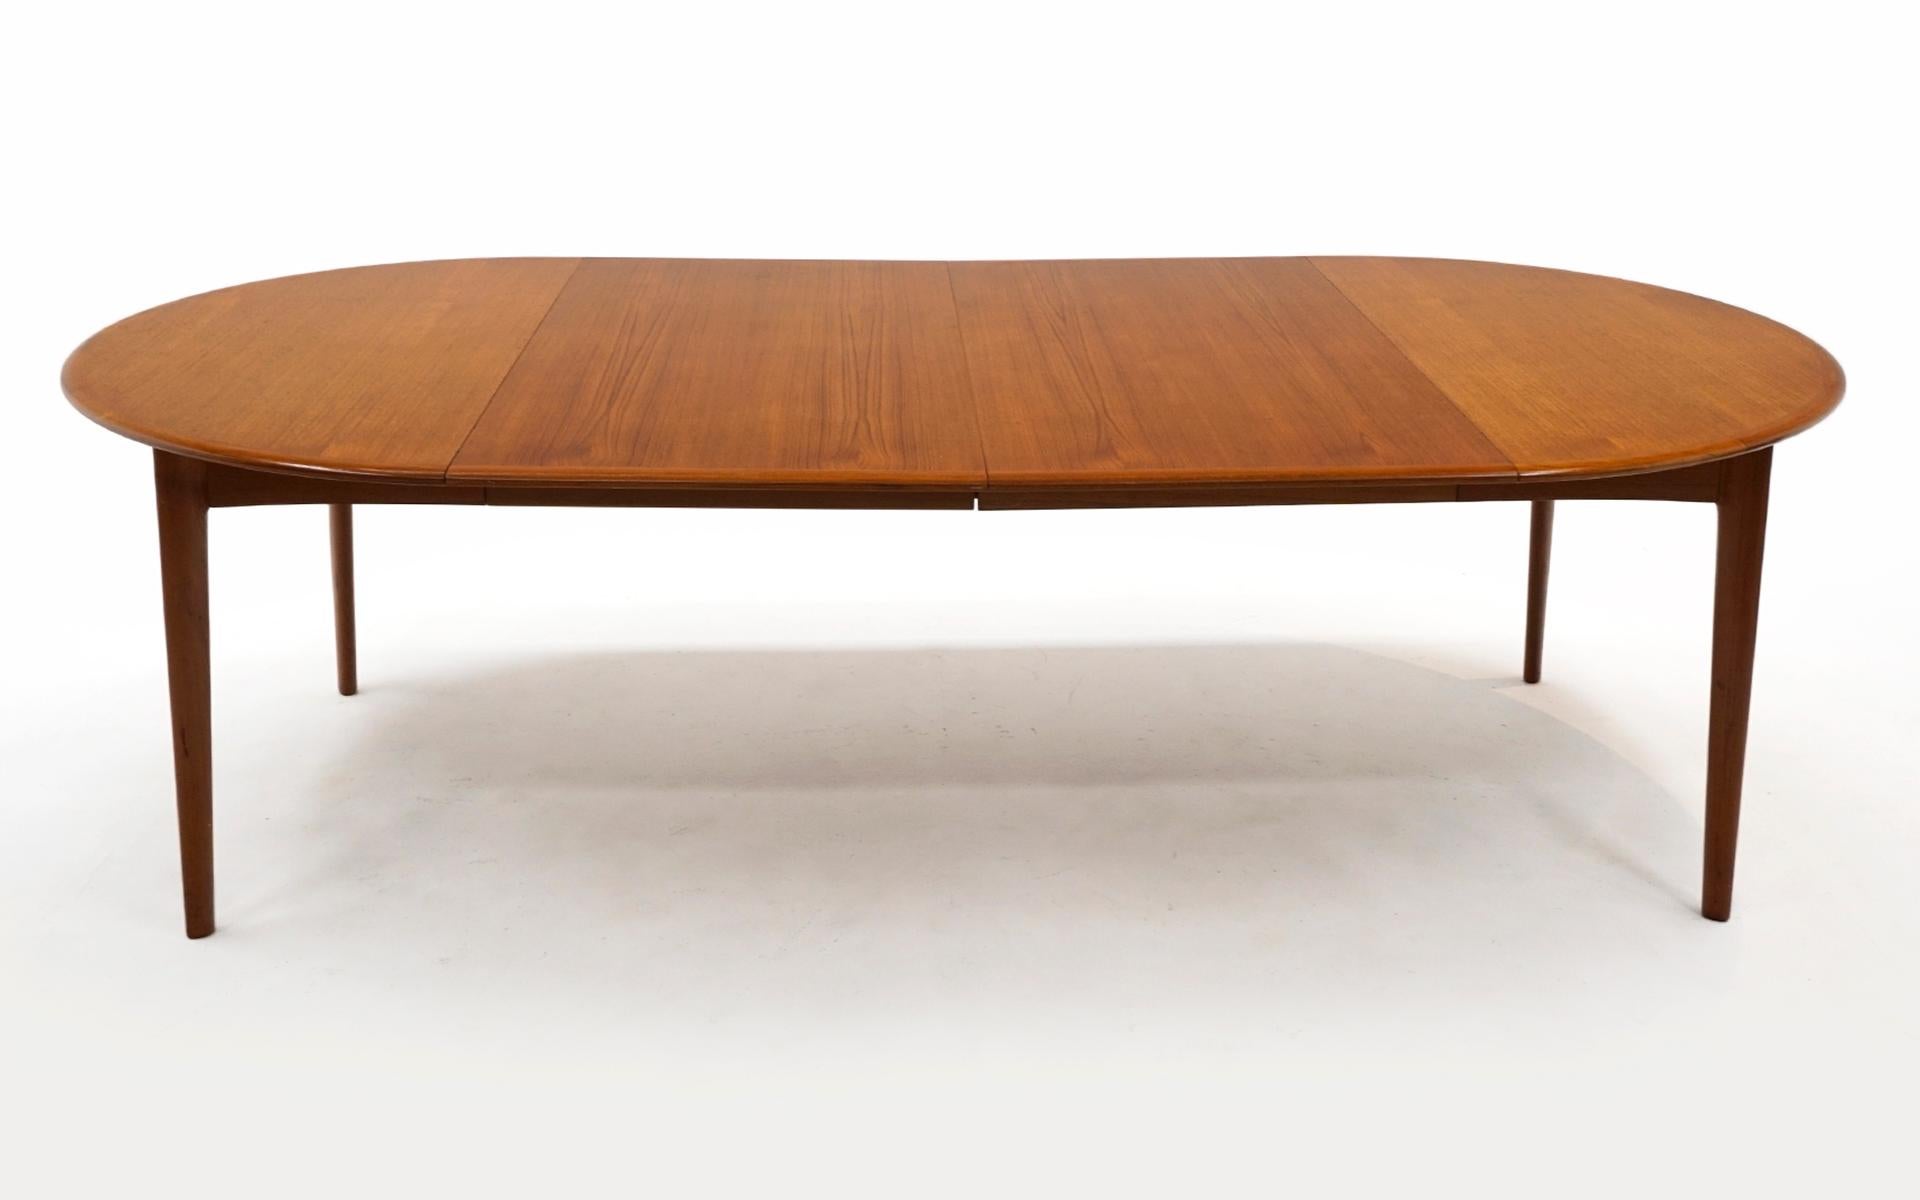 Danish Modern 48 inch round teak dining table with two extension leaves. Very good original condition. Some light scratches as can be seen in our photos. We acquired this table from the original owners that bought it new in Denmark in 1962. It has